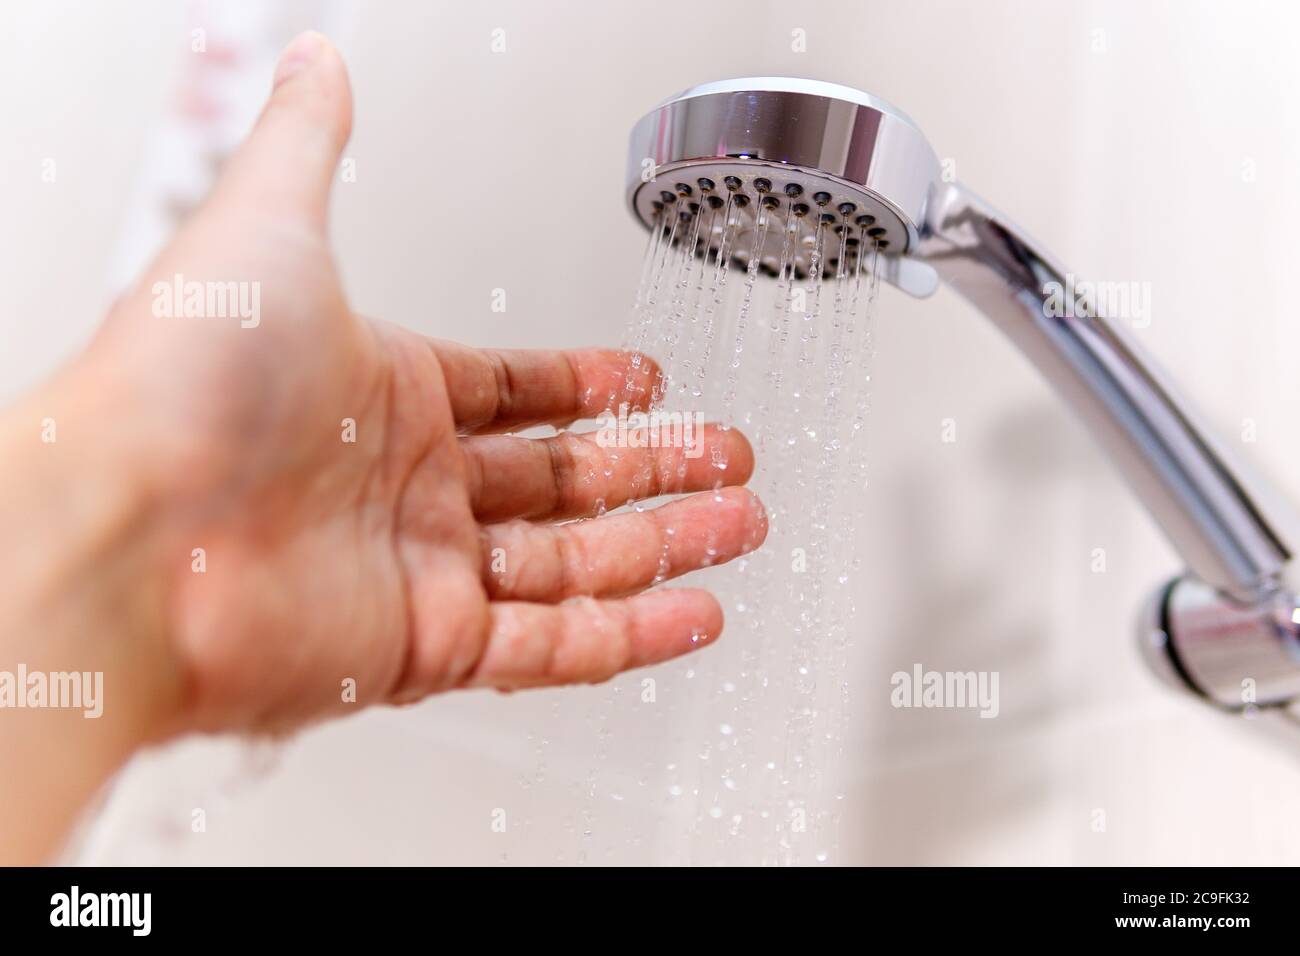 https://c8.alamy.com/comp/2C9FK32/check-the-temperature-of-the-shower-water-a-mans-hand-under-a-stream-of-water-selective-focus-2C9FK32.jpg